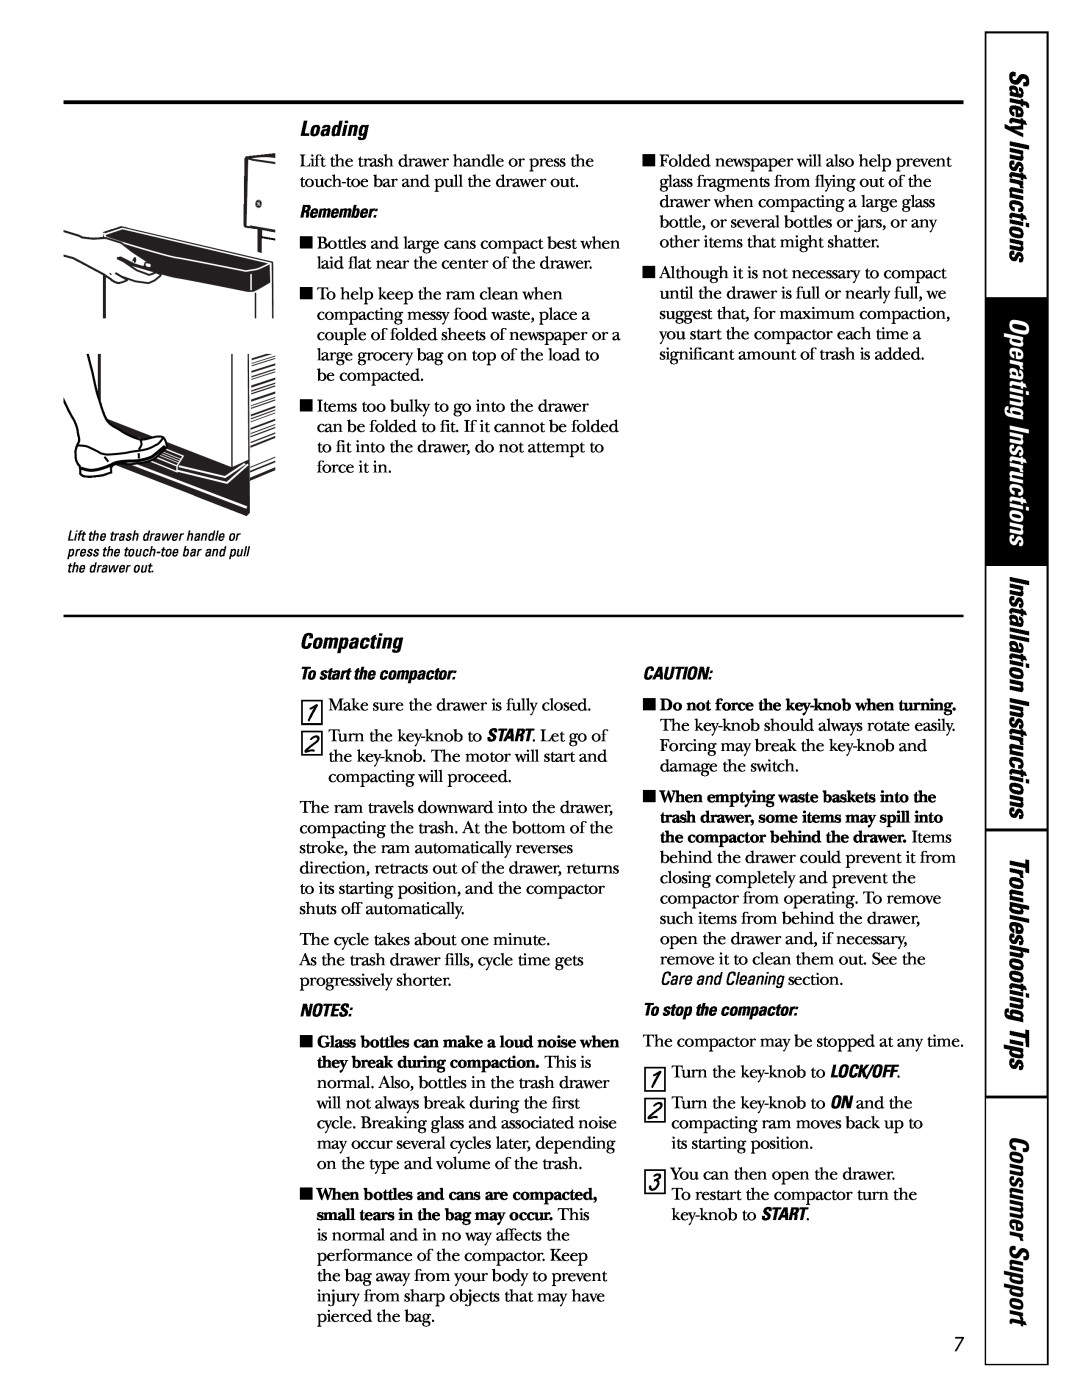 GE GCG1520 Safety Instructions Operating Instructions, Installation Instructions Troubleshooting Tips Consumer Support 